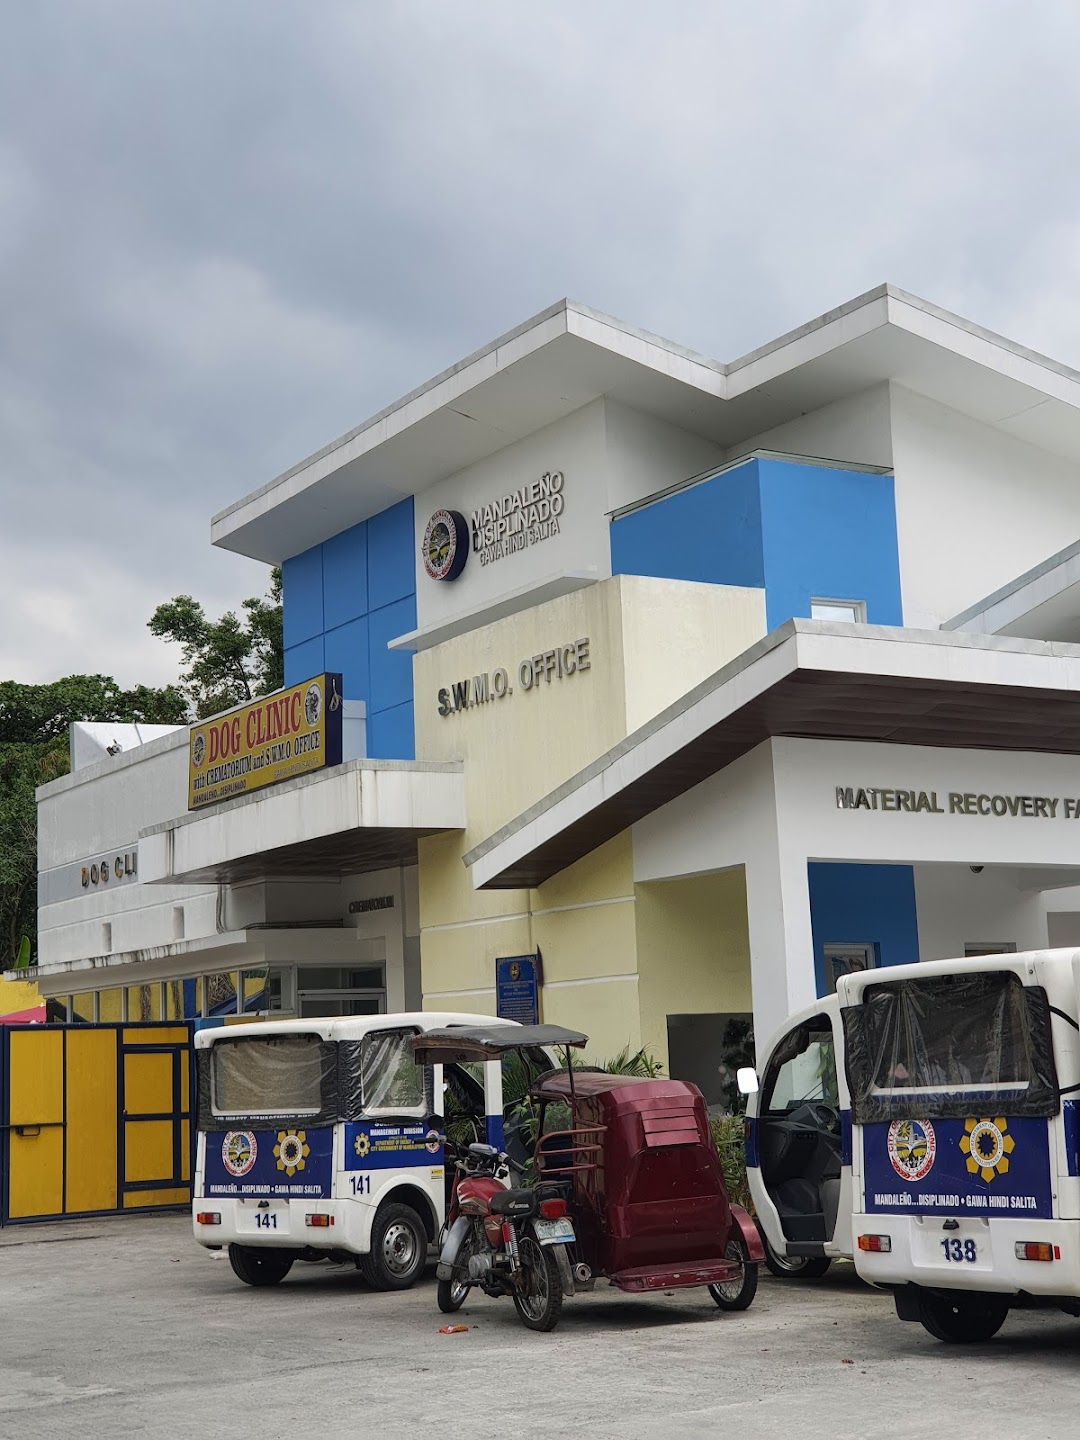 Mandaluyong Dog Clinic with Crematorium and S.W.M.O. Office